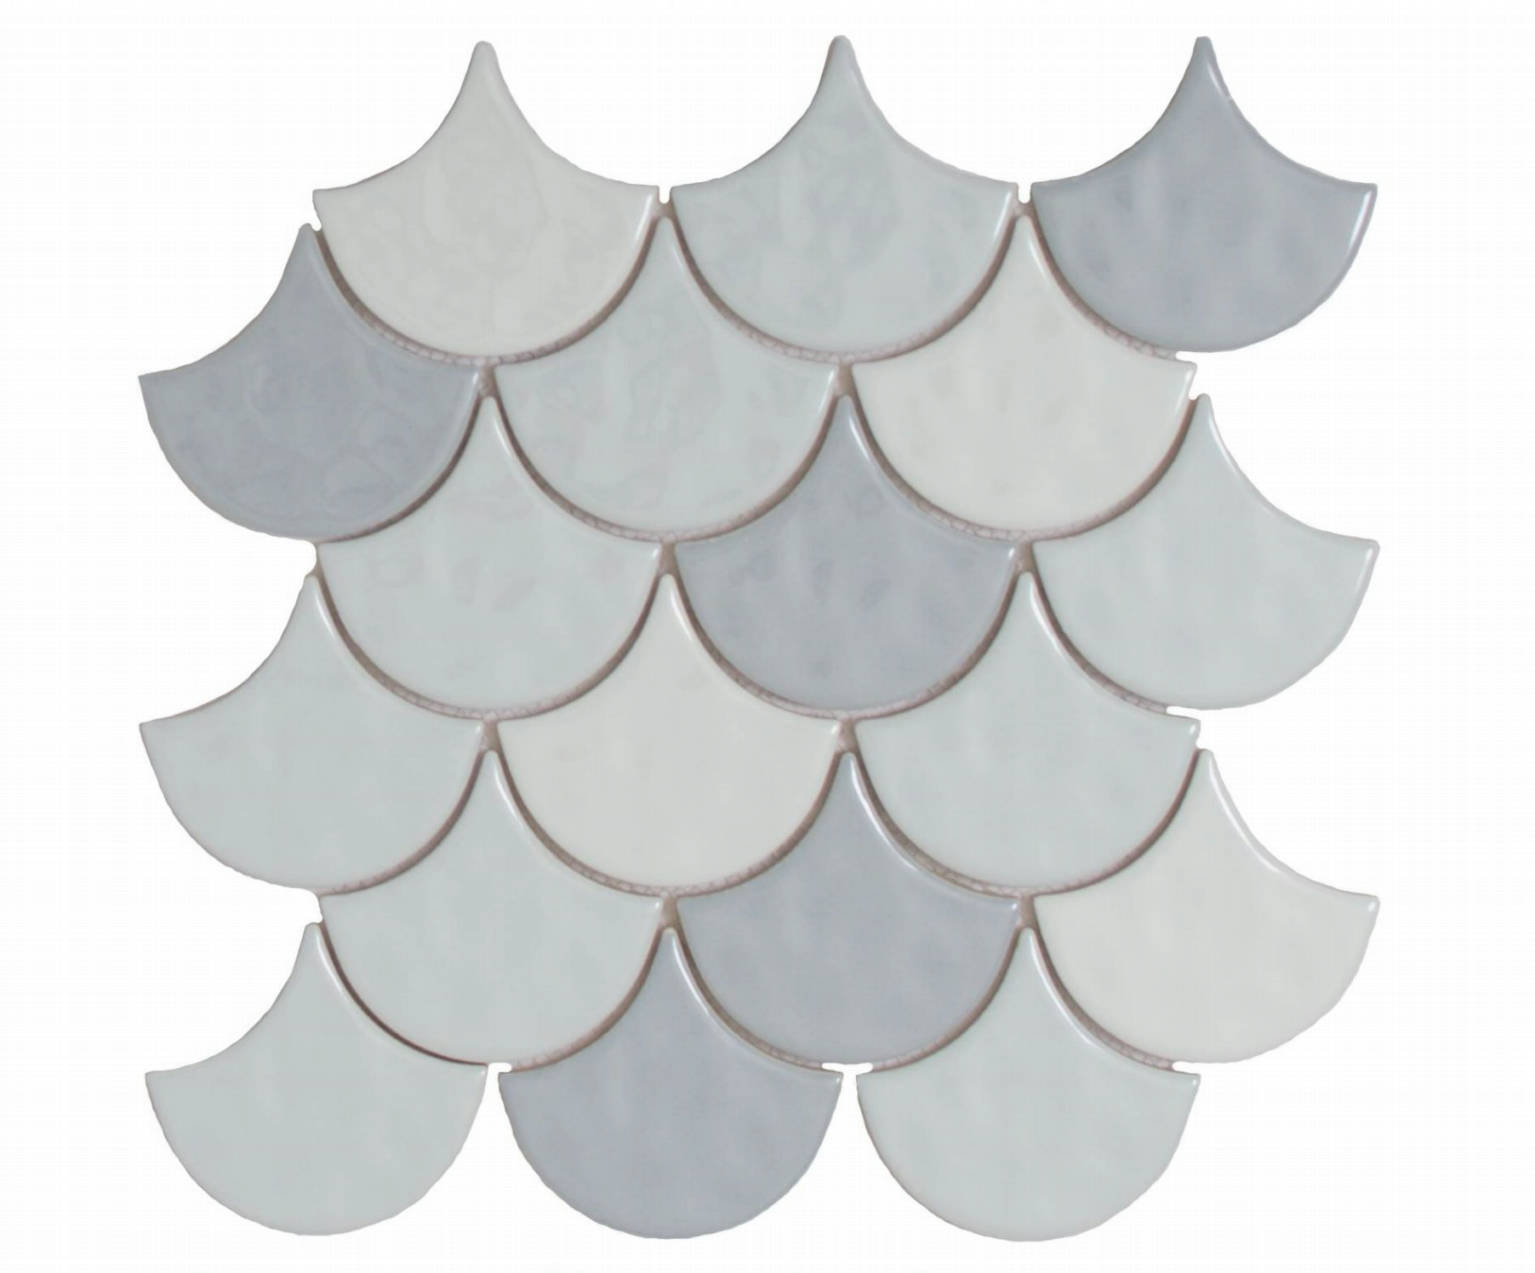 QSXA-131415 | Stones & More | Finest selection of Mosaics, Glass, Tile and Stone